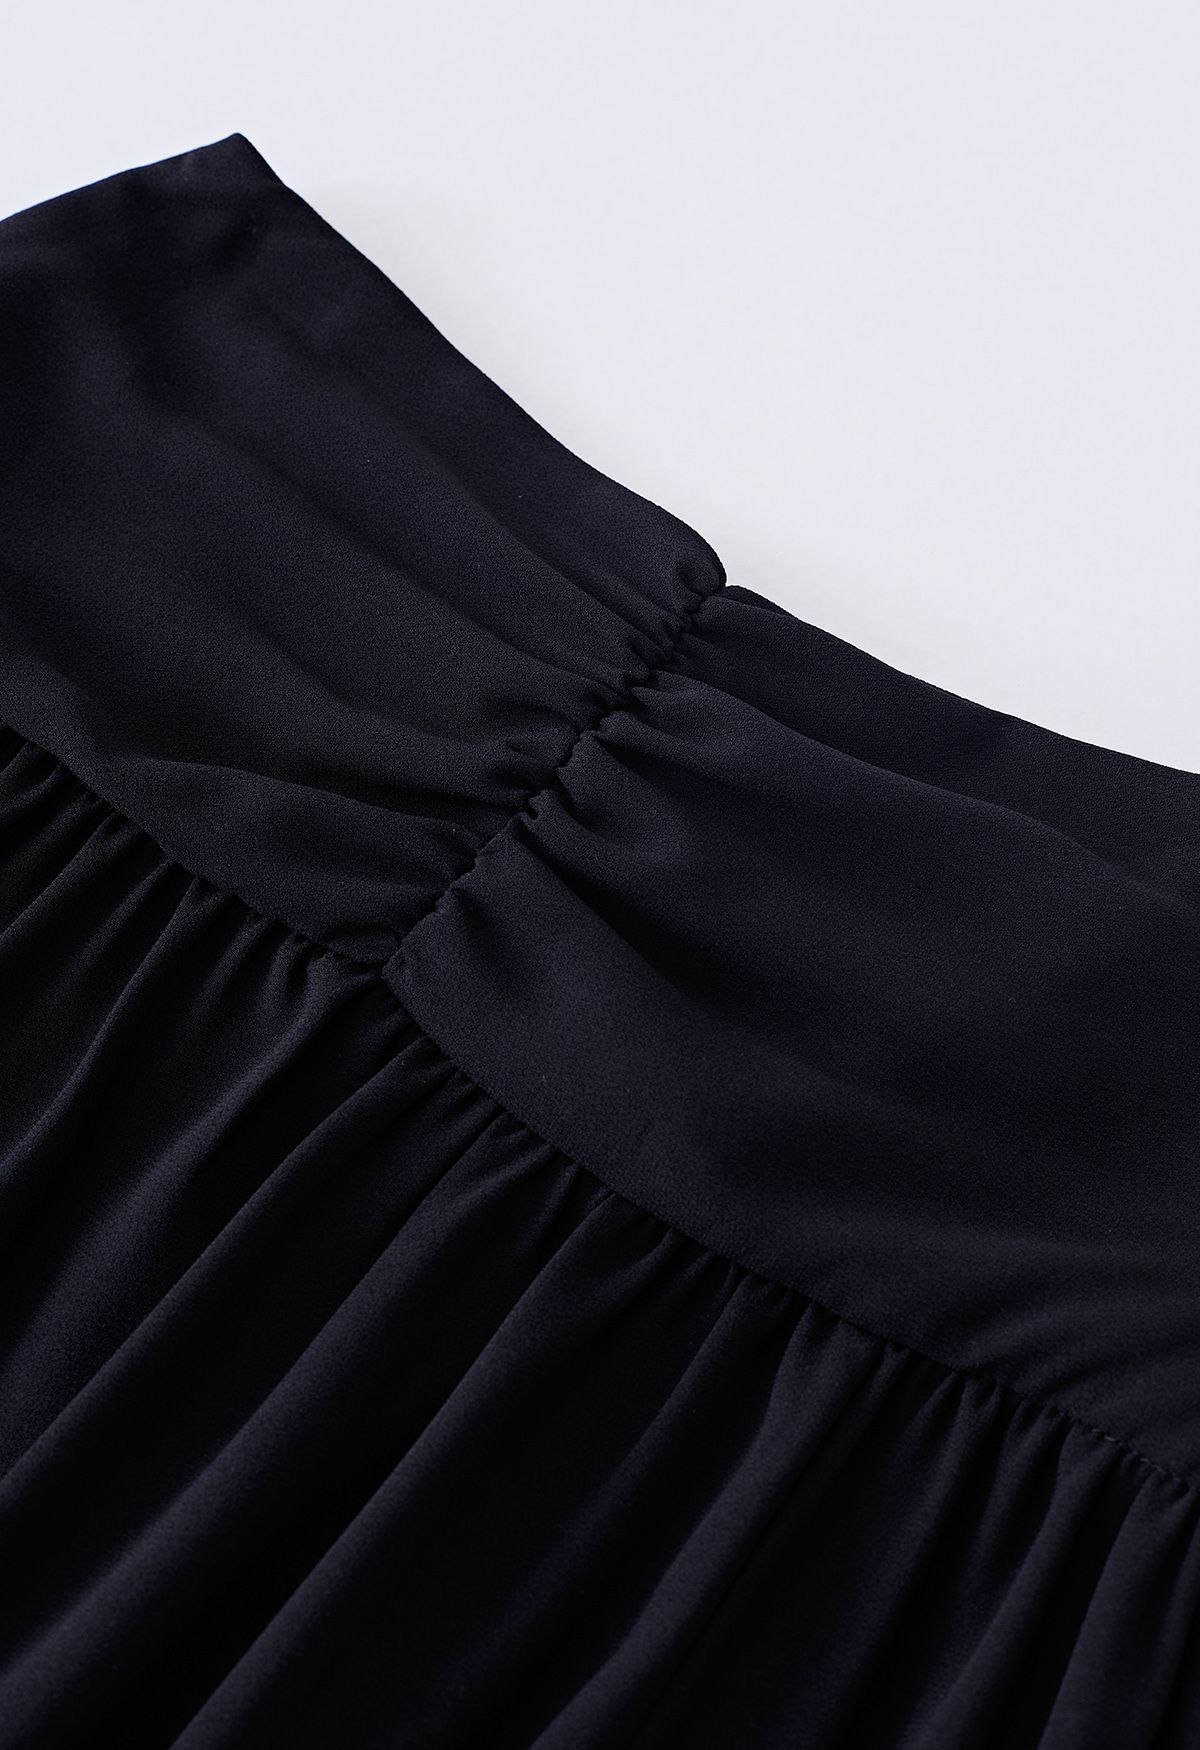 Ruched Waist Slit Maxi Skirt in Black - Retro, Indie and Unique Fashion